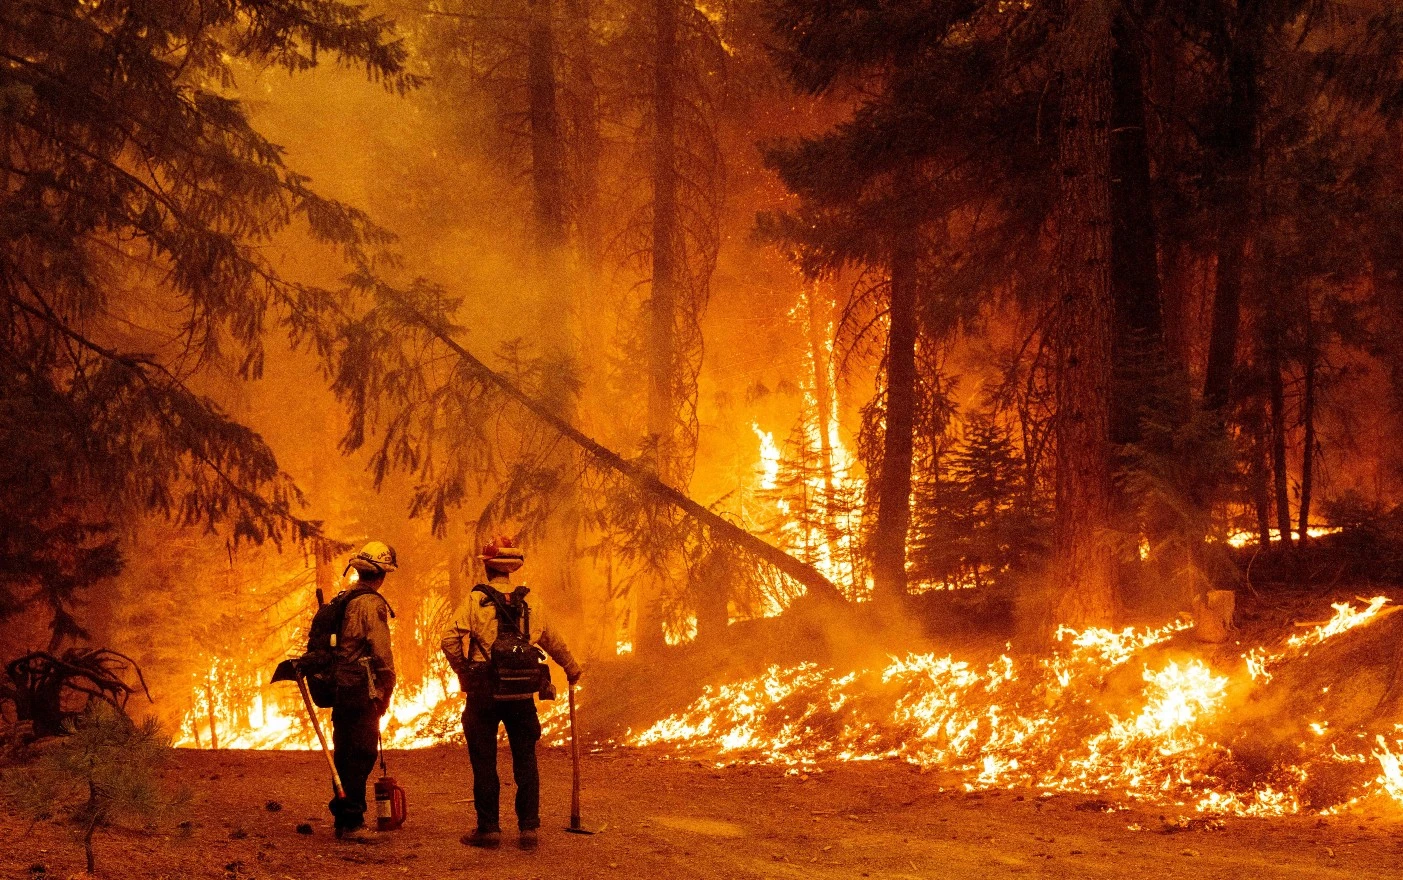 Two fire fighters standing amidst a burning forest